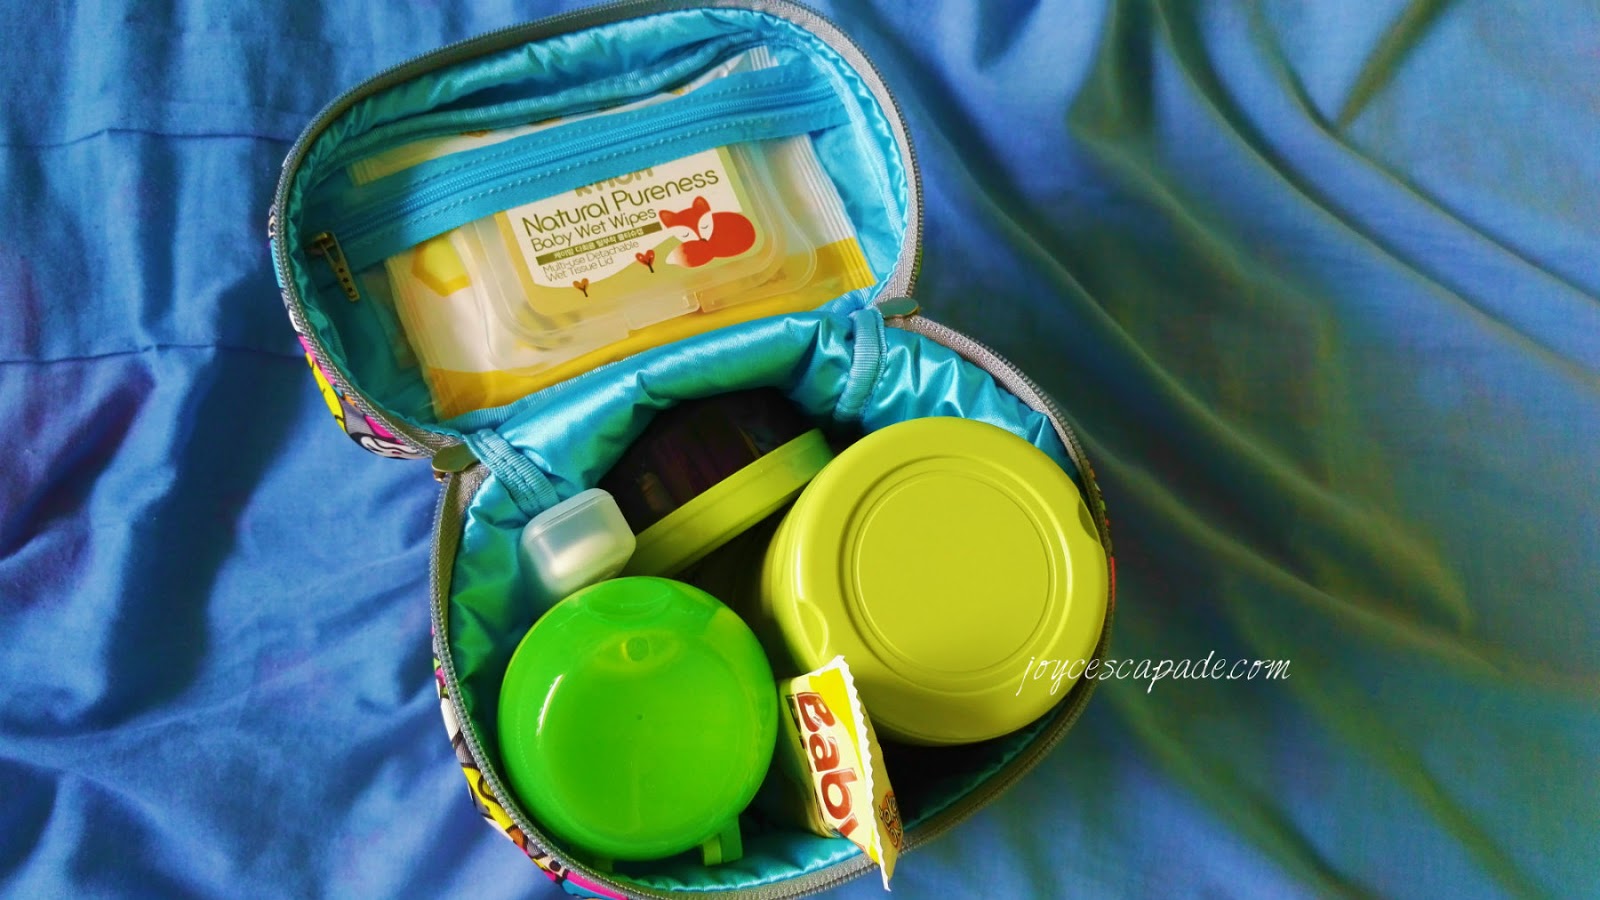 Packing JuJuBe Hello Friends Fuel Cell as Baby's Lunch Bag - Joy 'N ...